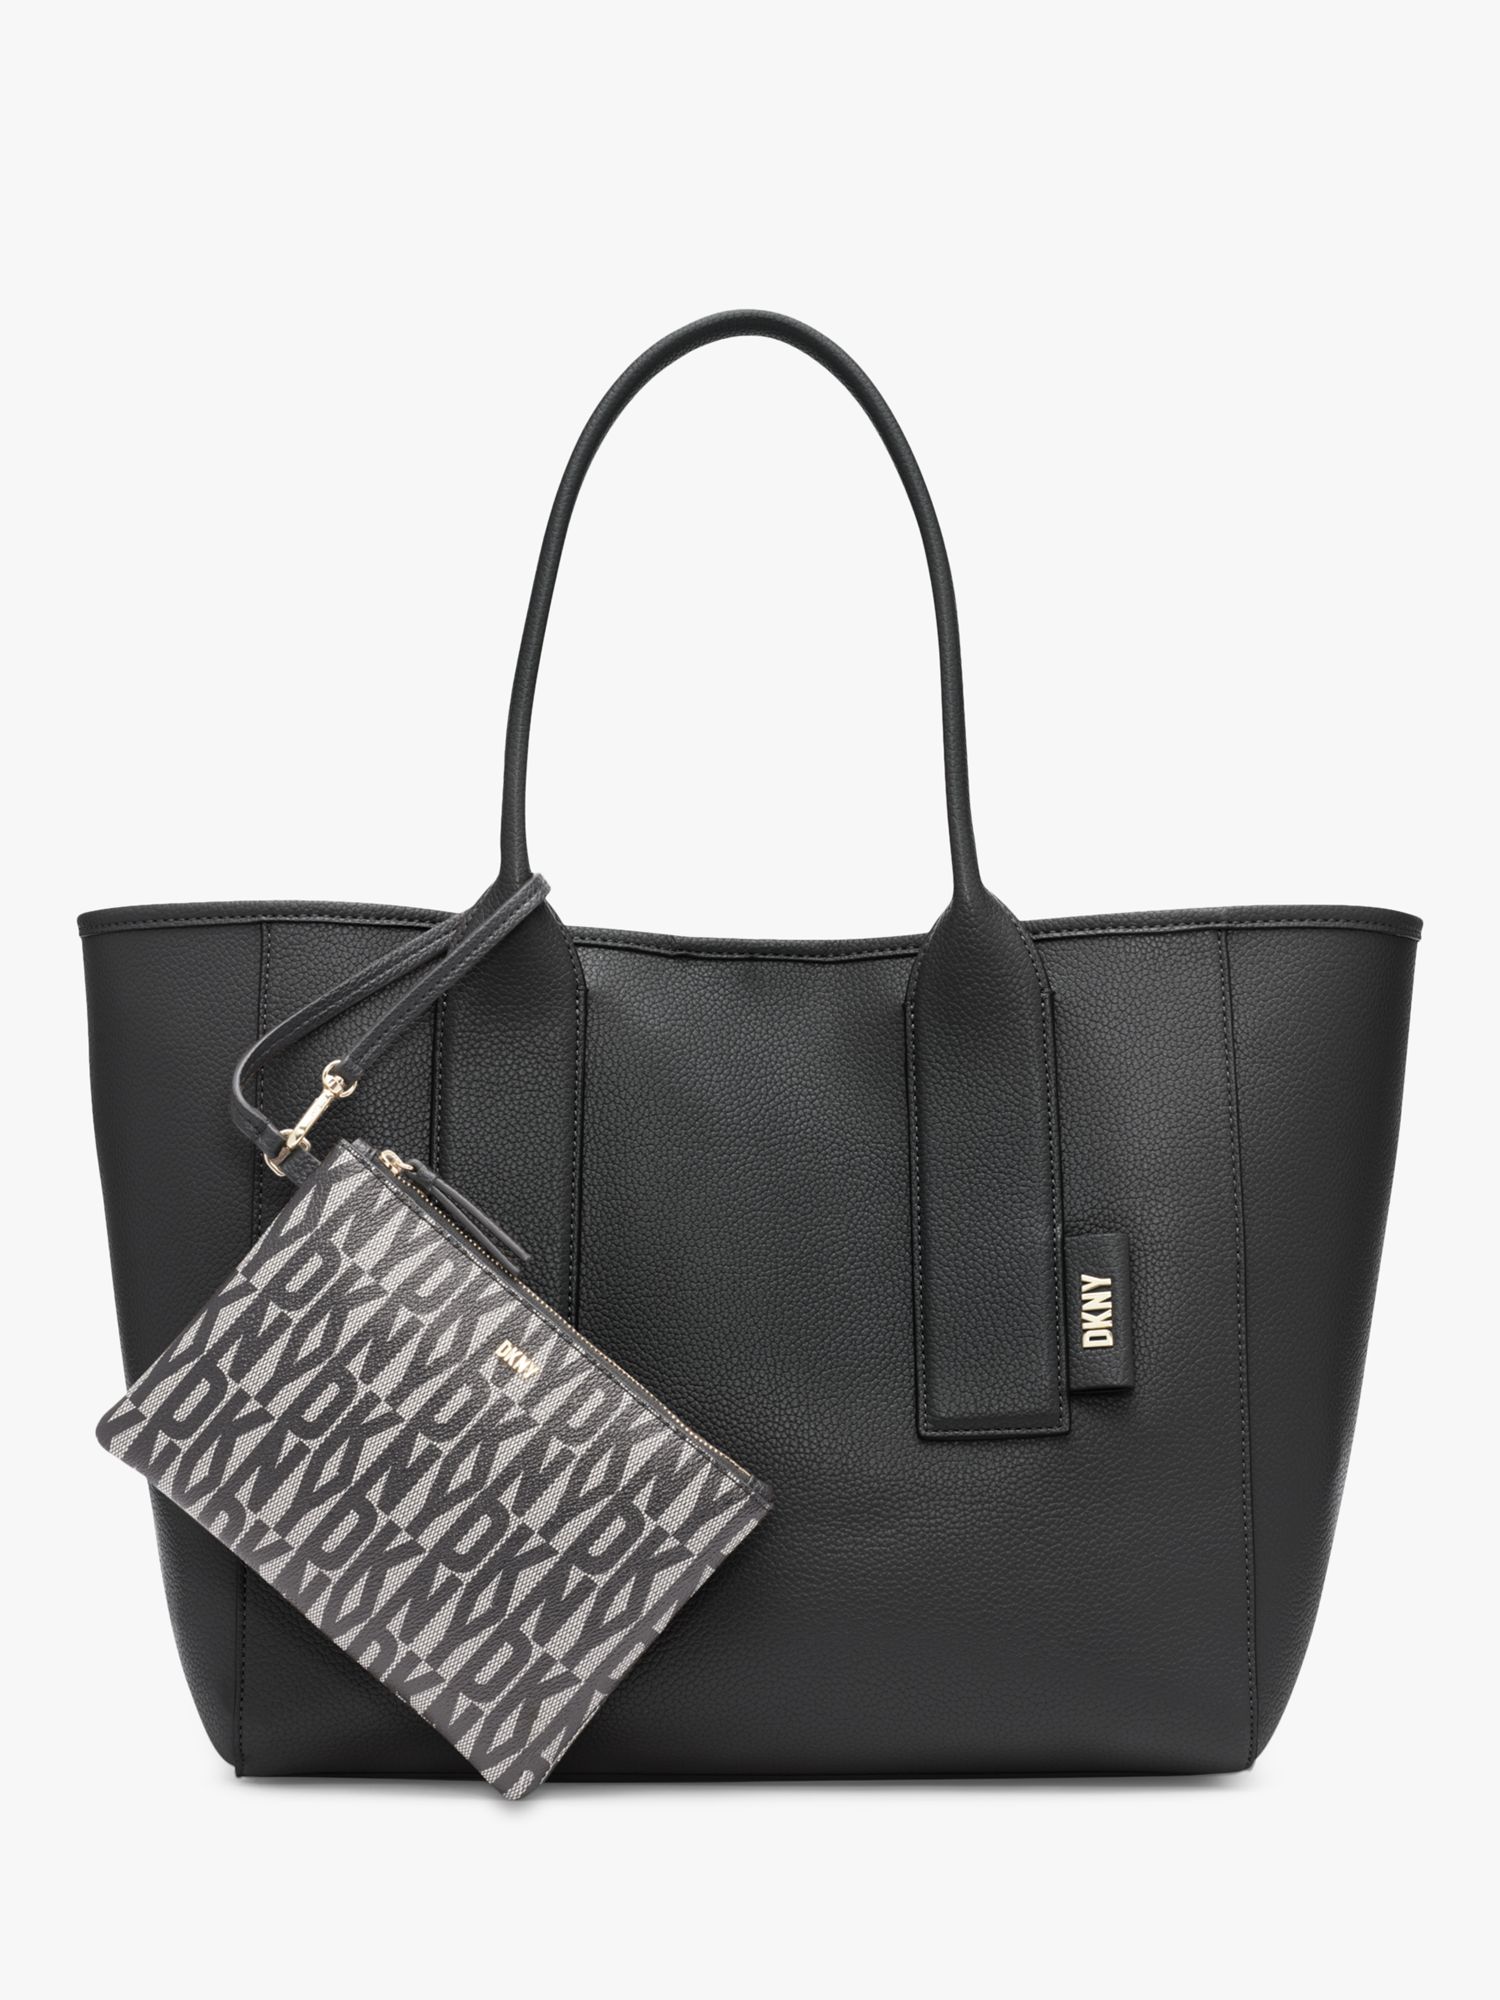 Dkny, Bags, Dkny Signature Black Faux Leather Tote